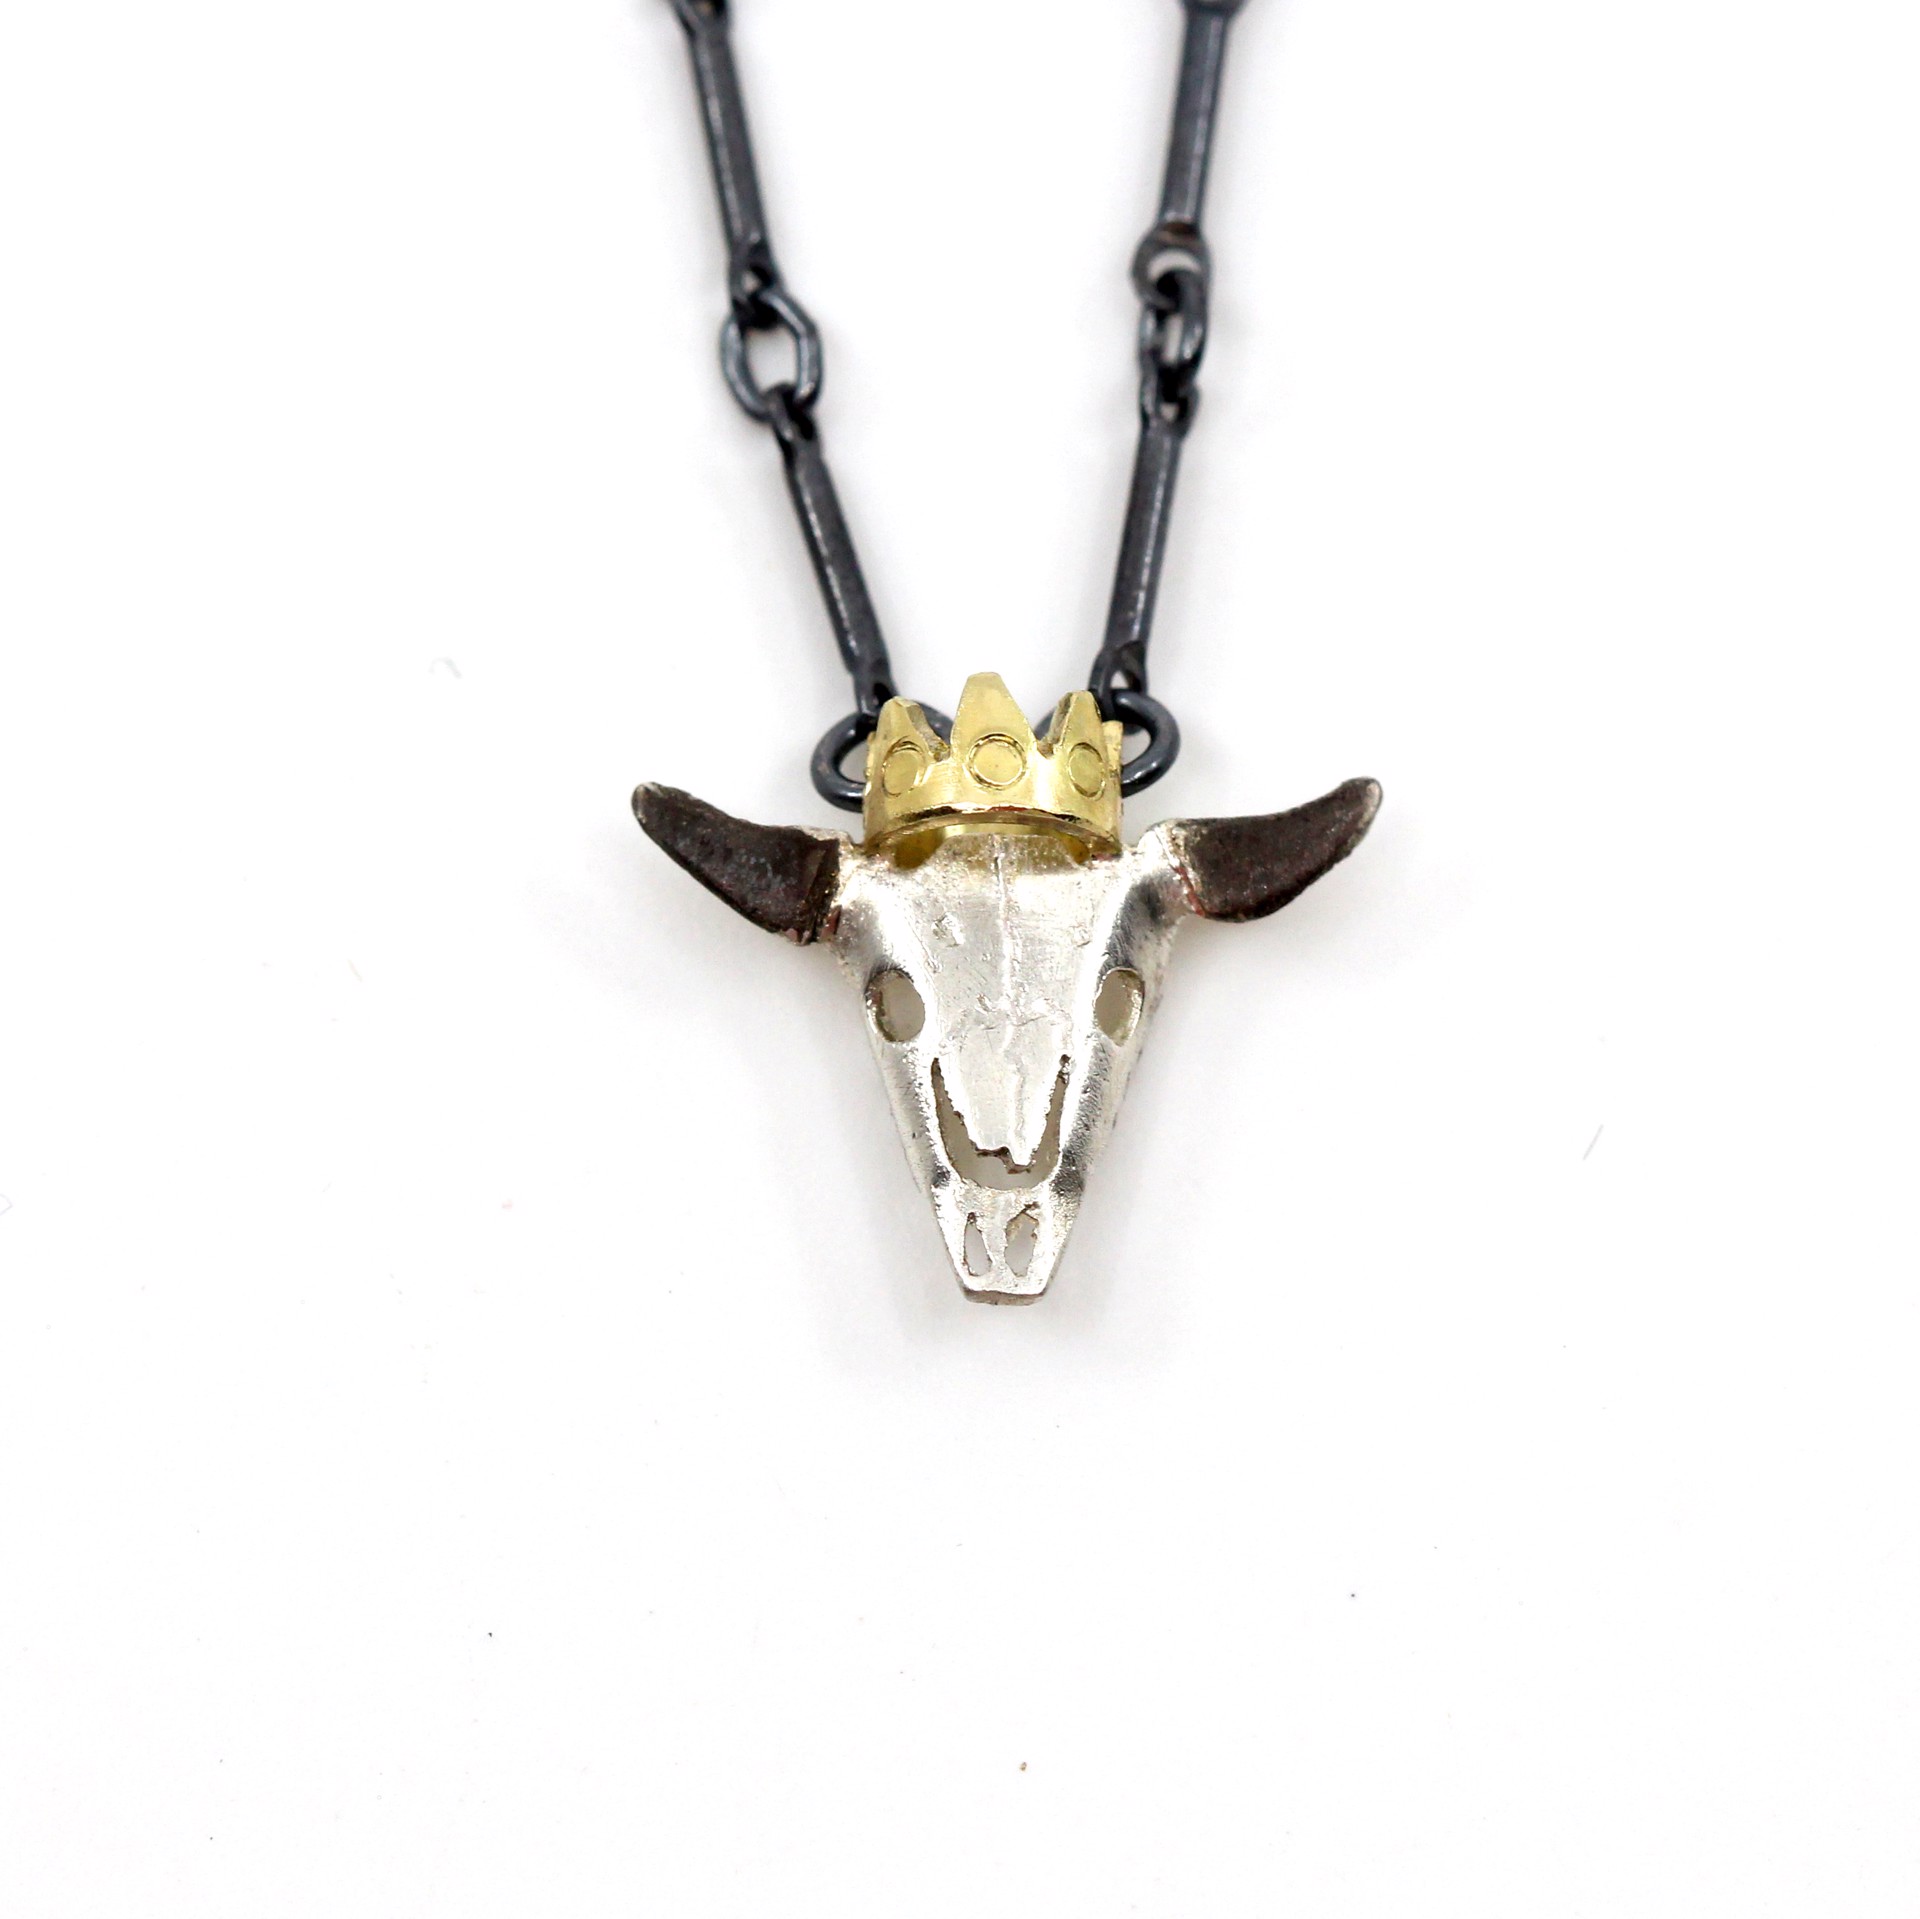 Tiny Suffalo Skull Necklace with Crown by Susan Elnora